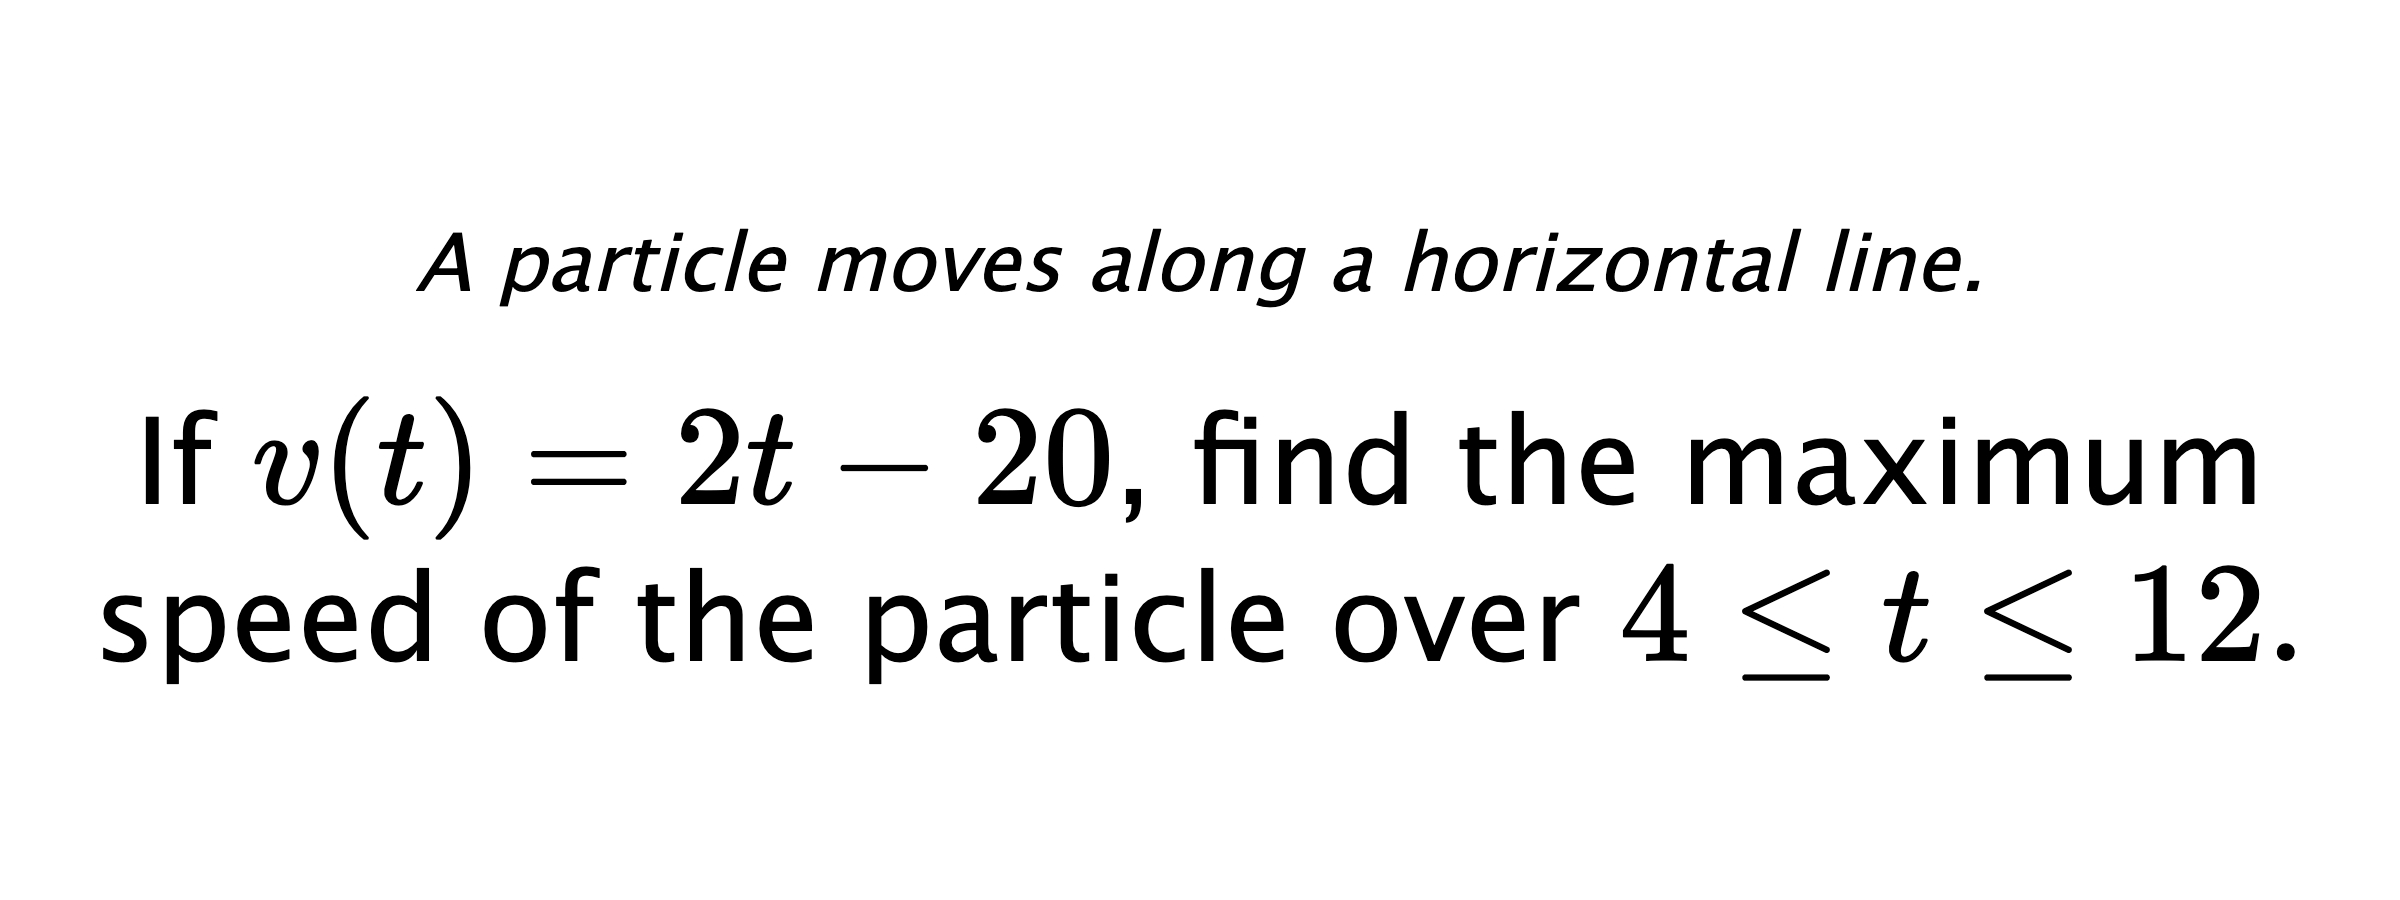 A particle moves along a horizontal line. If $ v(t)=2t-20 $, find the maximum speed of the particle over $ 4 \leq t \leq 12 .$